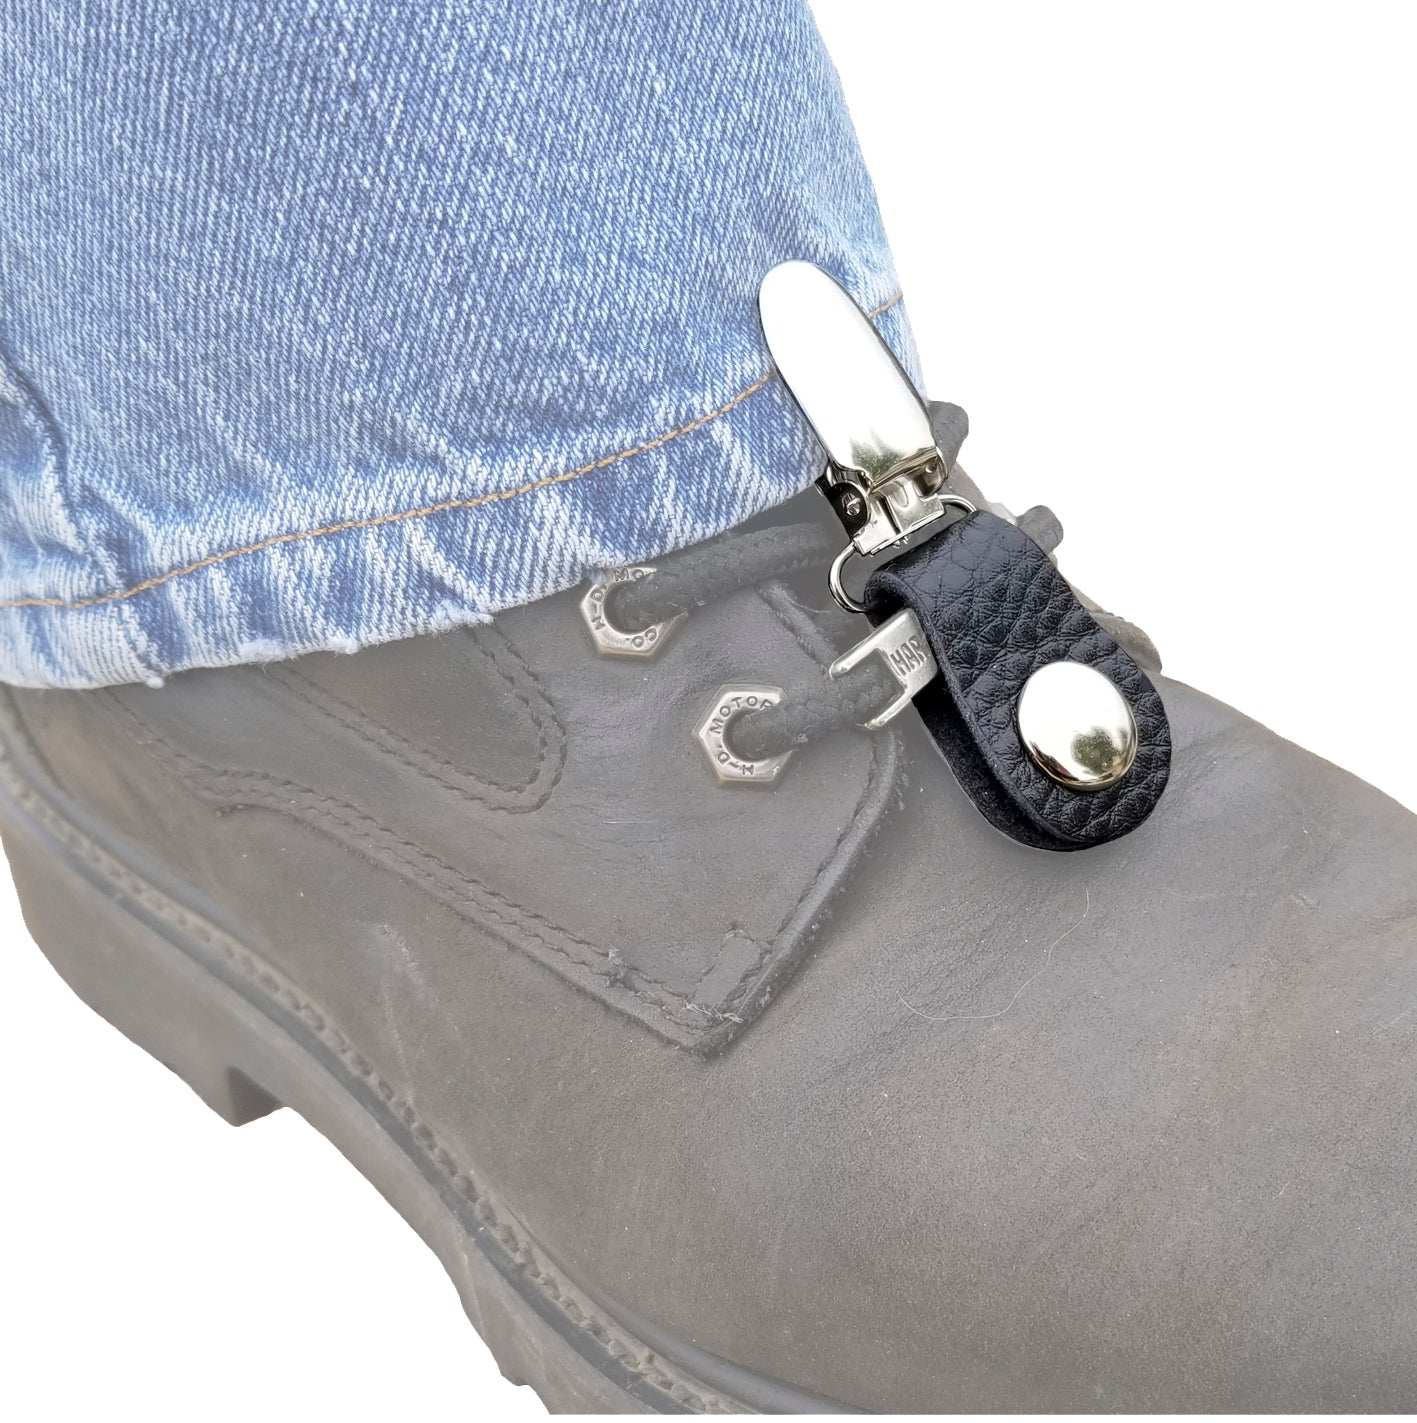 Motorcycle Boot Straps, Keeps Pant Legs Down While Riding 